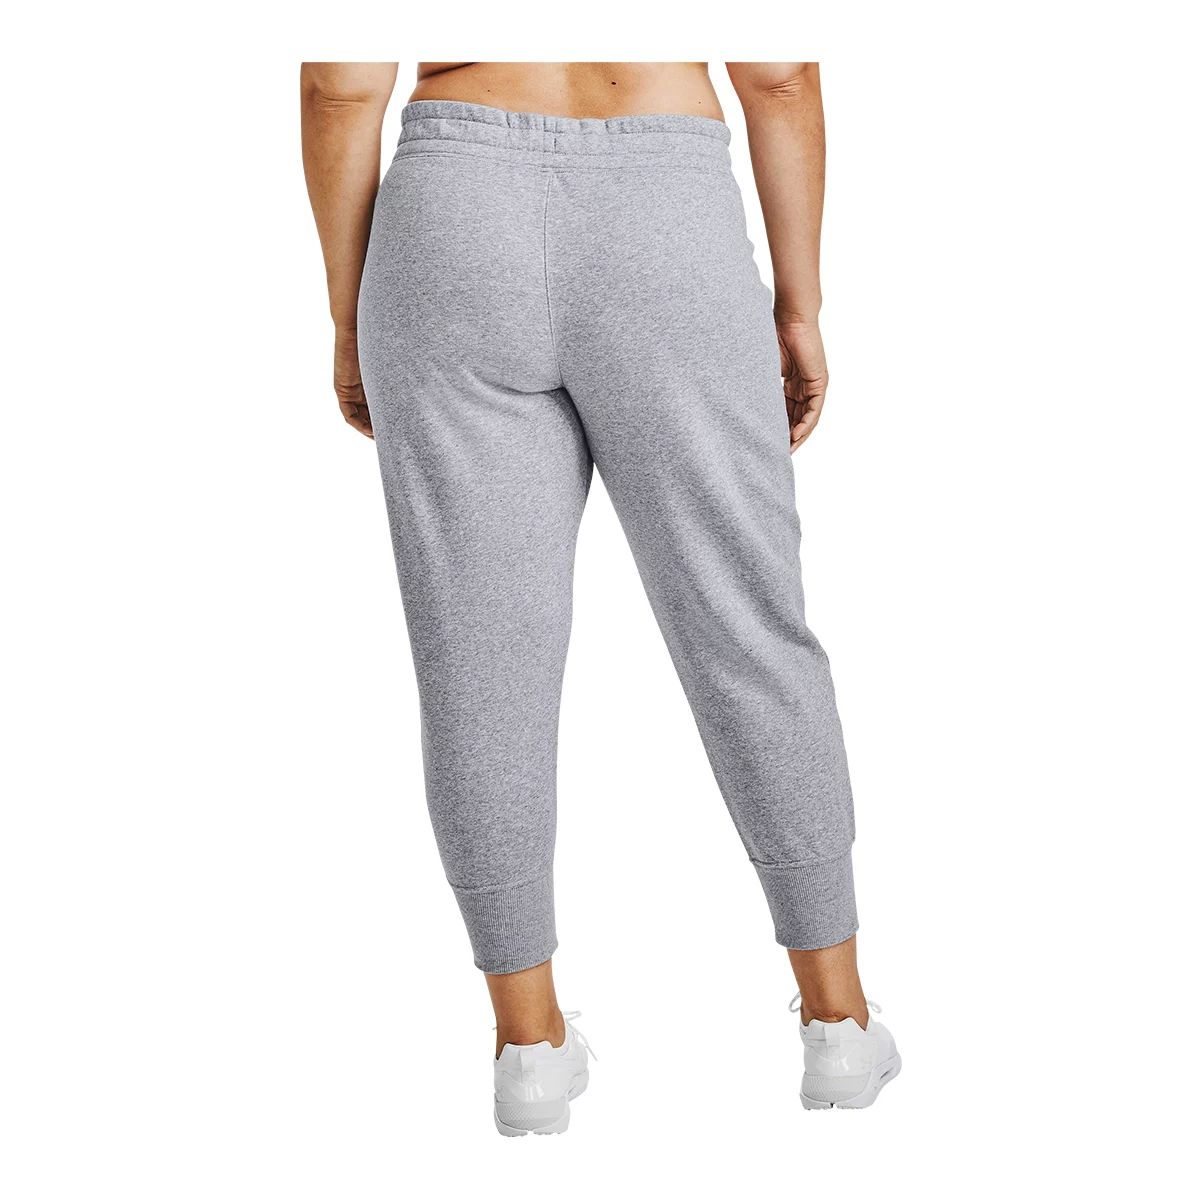 Under Armour Sweatpants Girls Large Loose Teens Gray Zip Pockets Stretch  N205